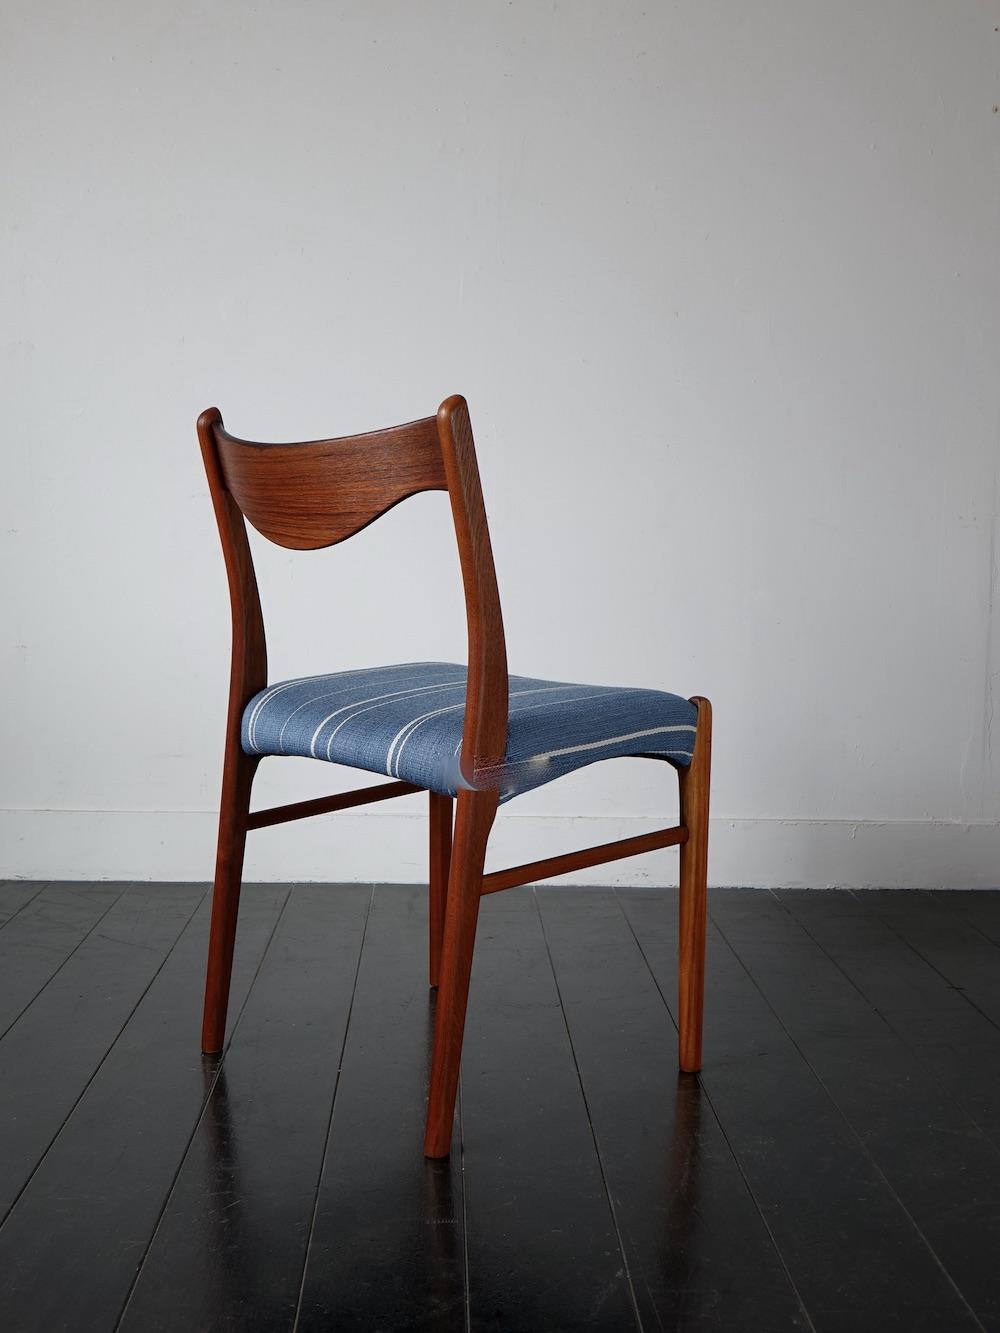 ”GS61″ Dining chair by Arne Wahl Iversen for Glyngøre Stolefabrik